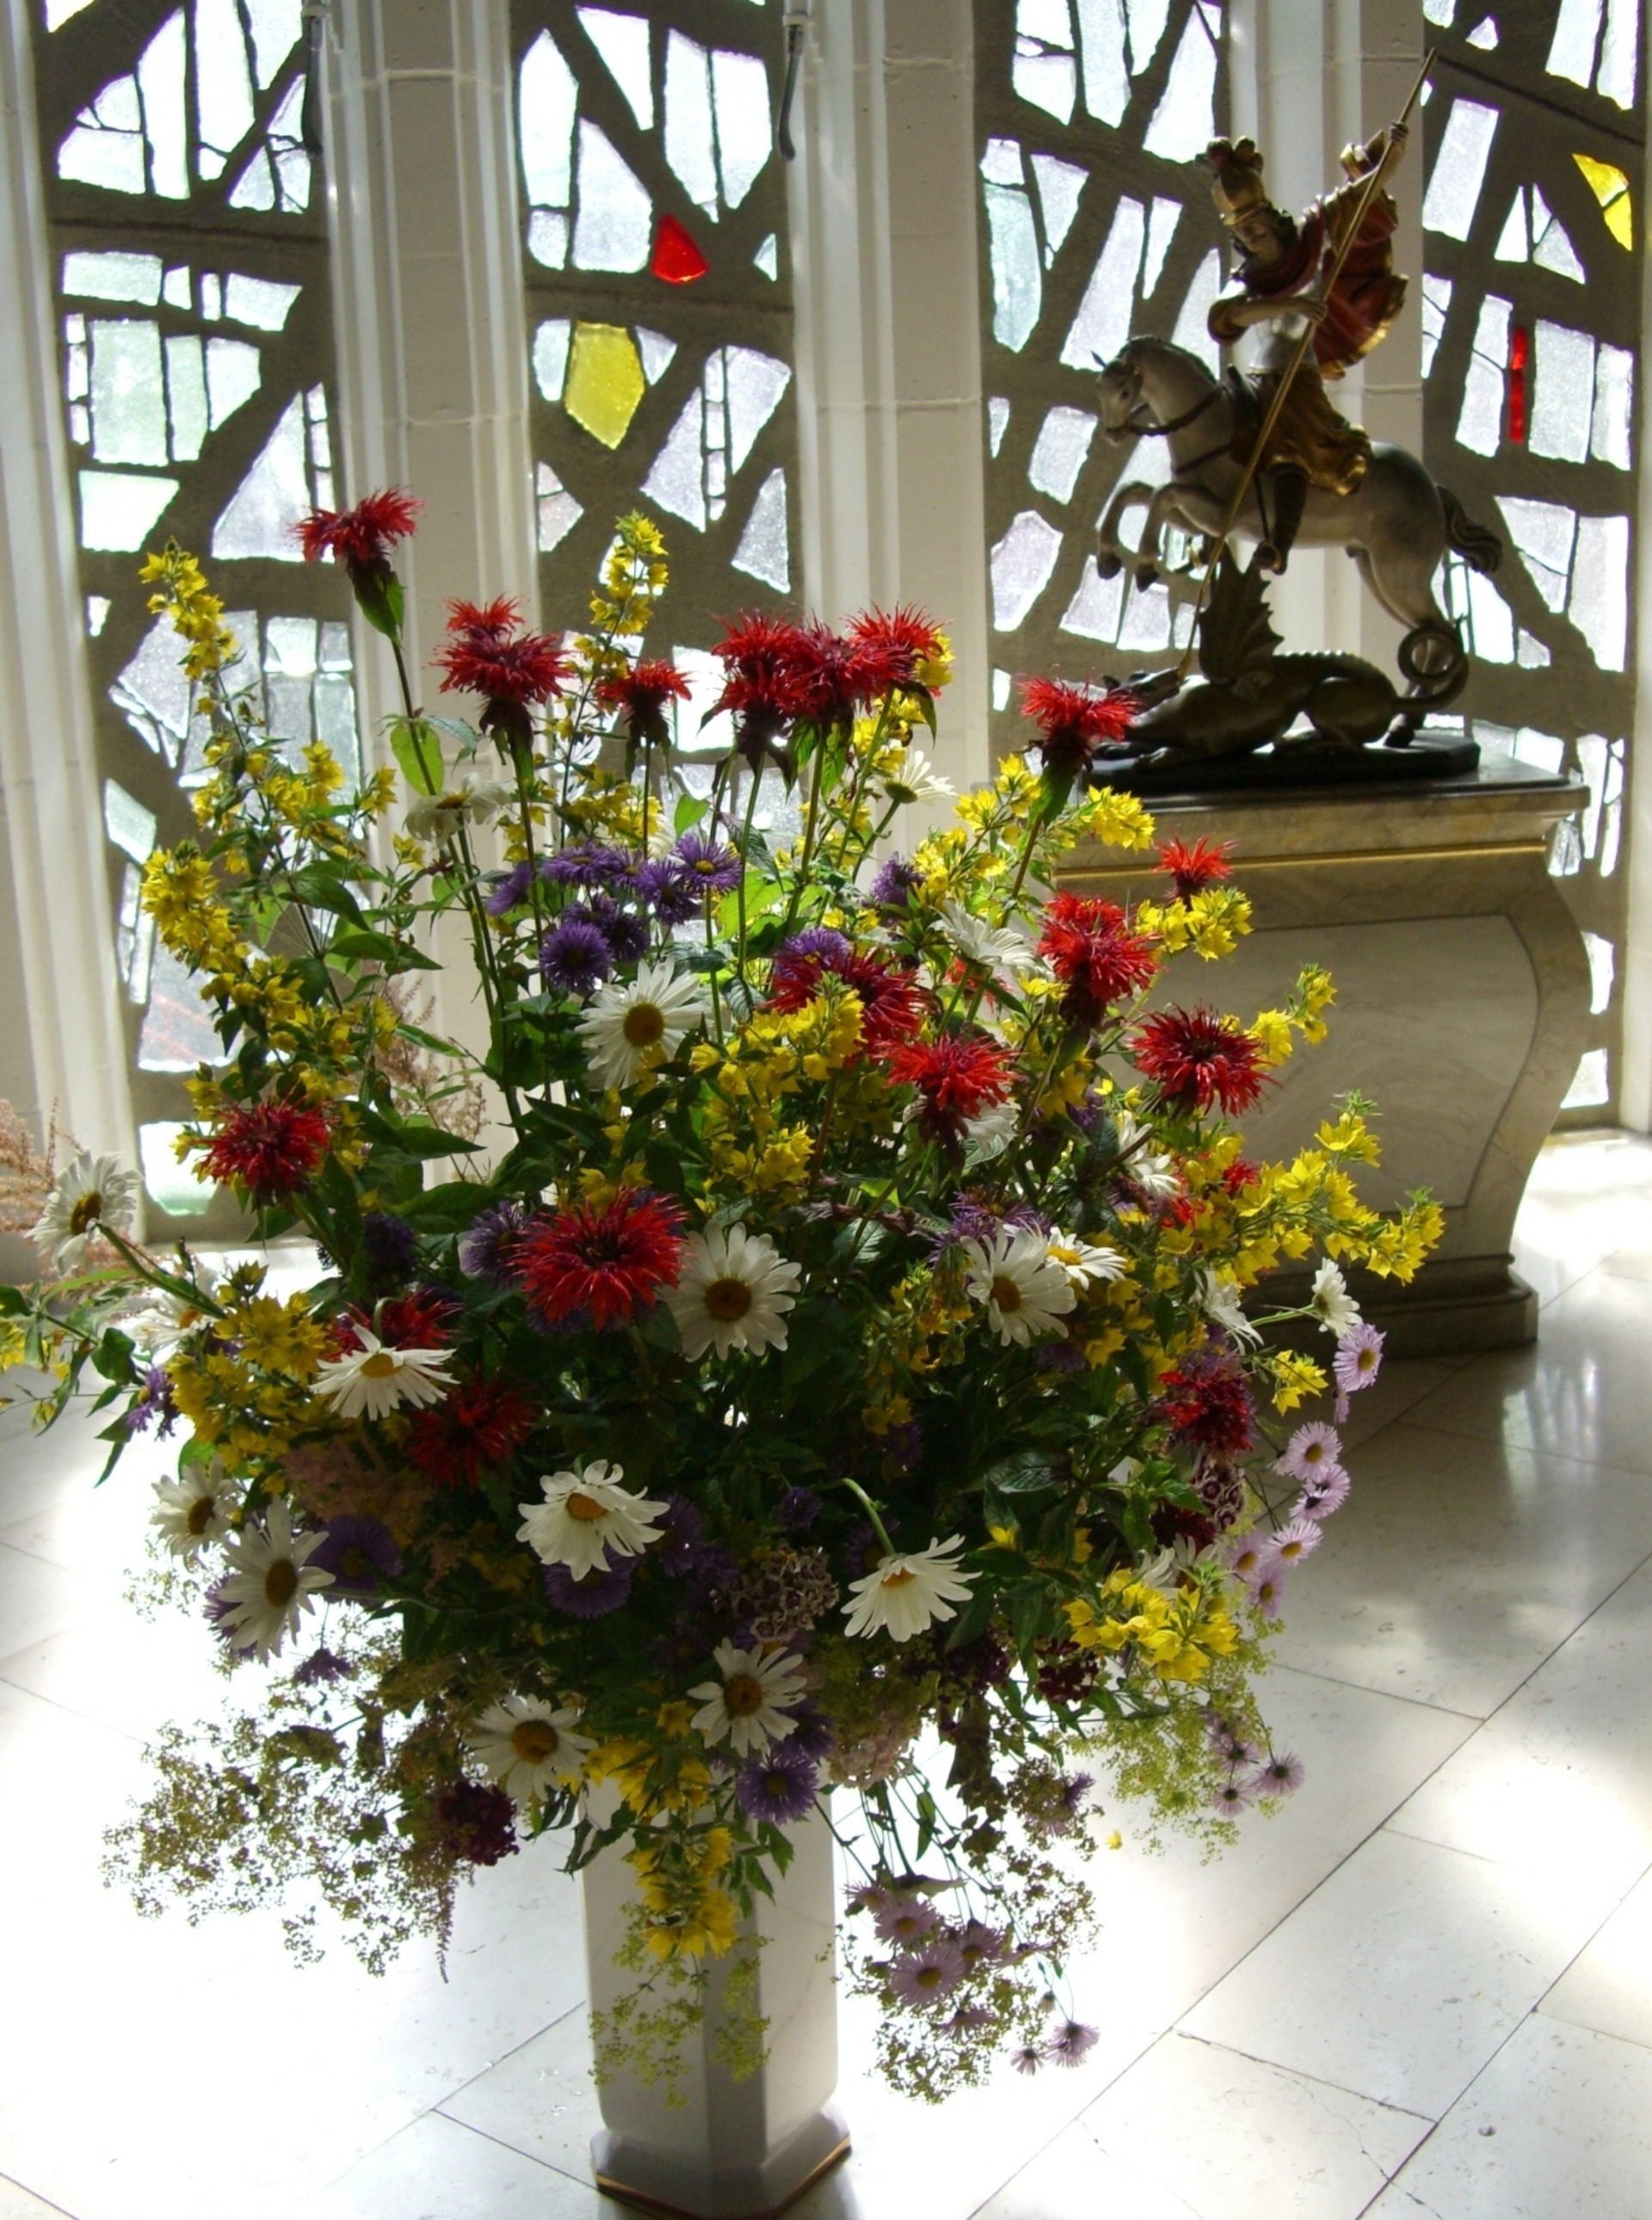 white, red, purple and yellow petaled flowers floral arrangement near man on horse statuette